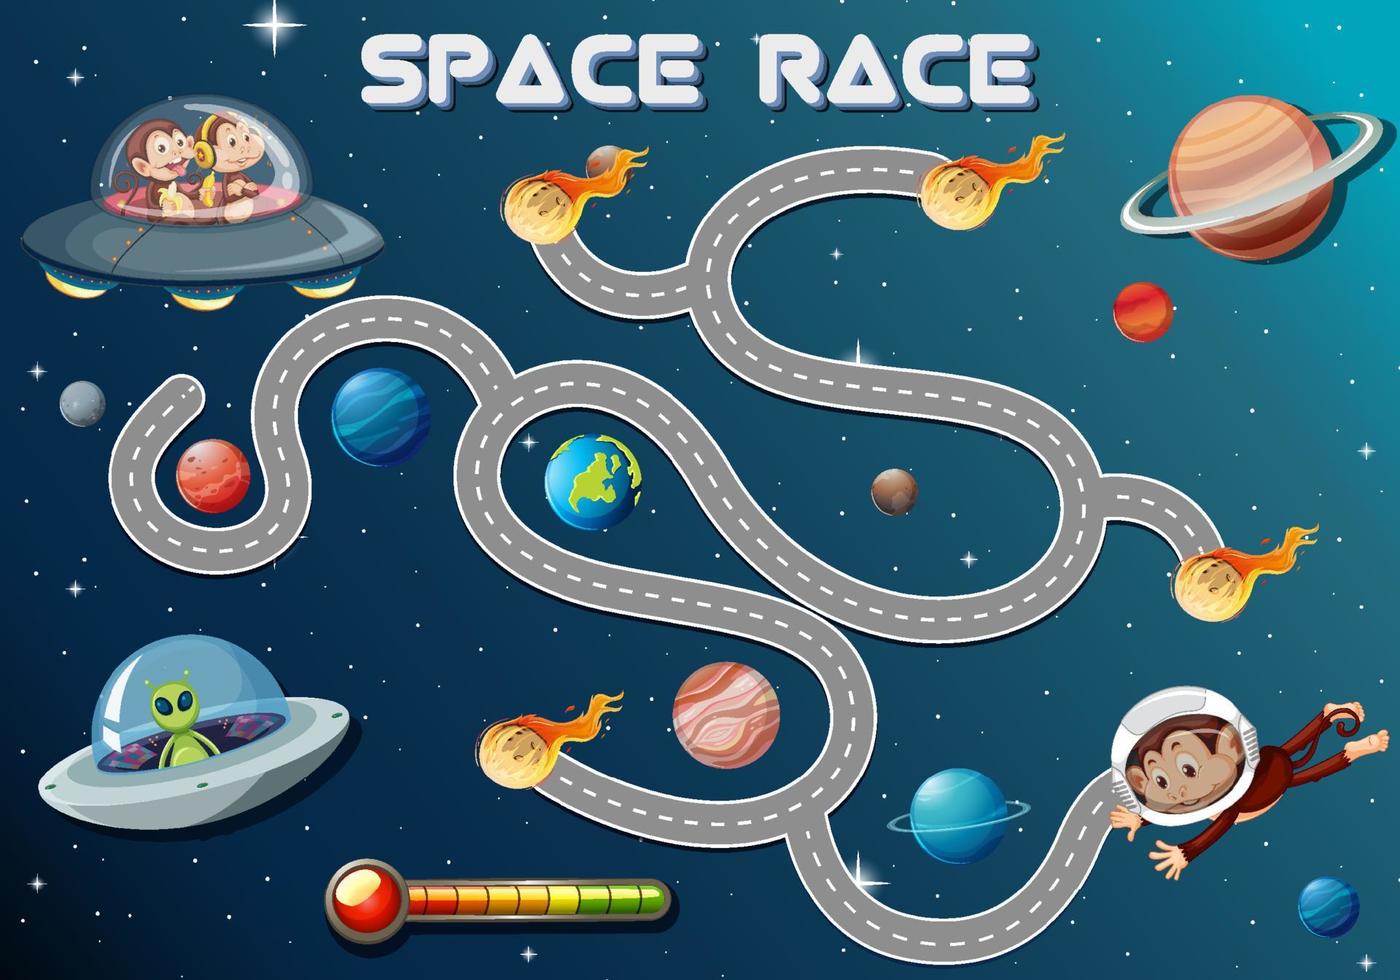 Maze game template in space race theme vector